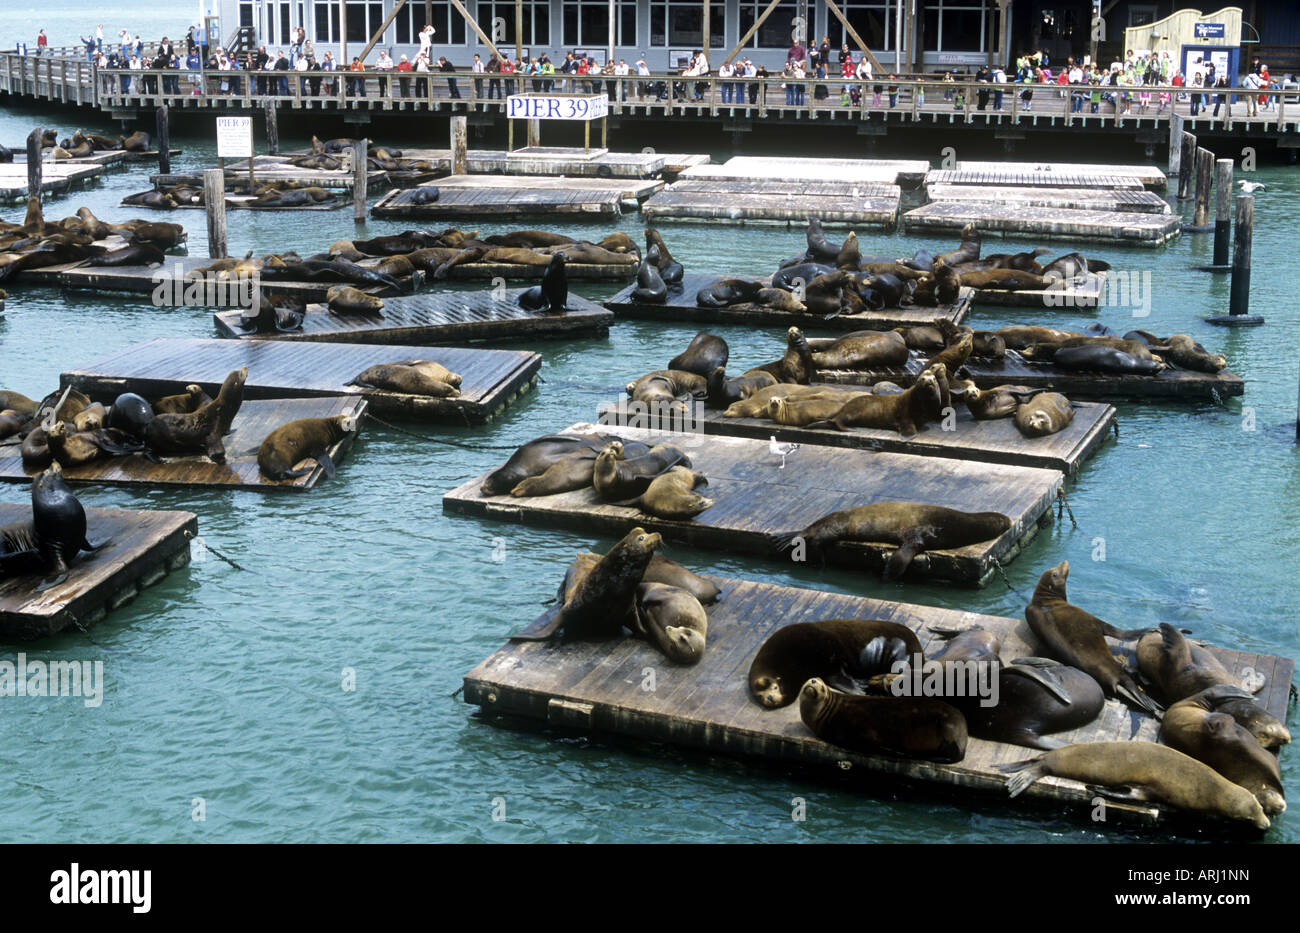 tourists watch sealions at Pier 49 Fishermans Wharf San Francisco Stock Photo